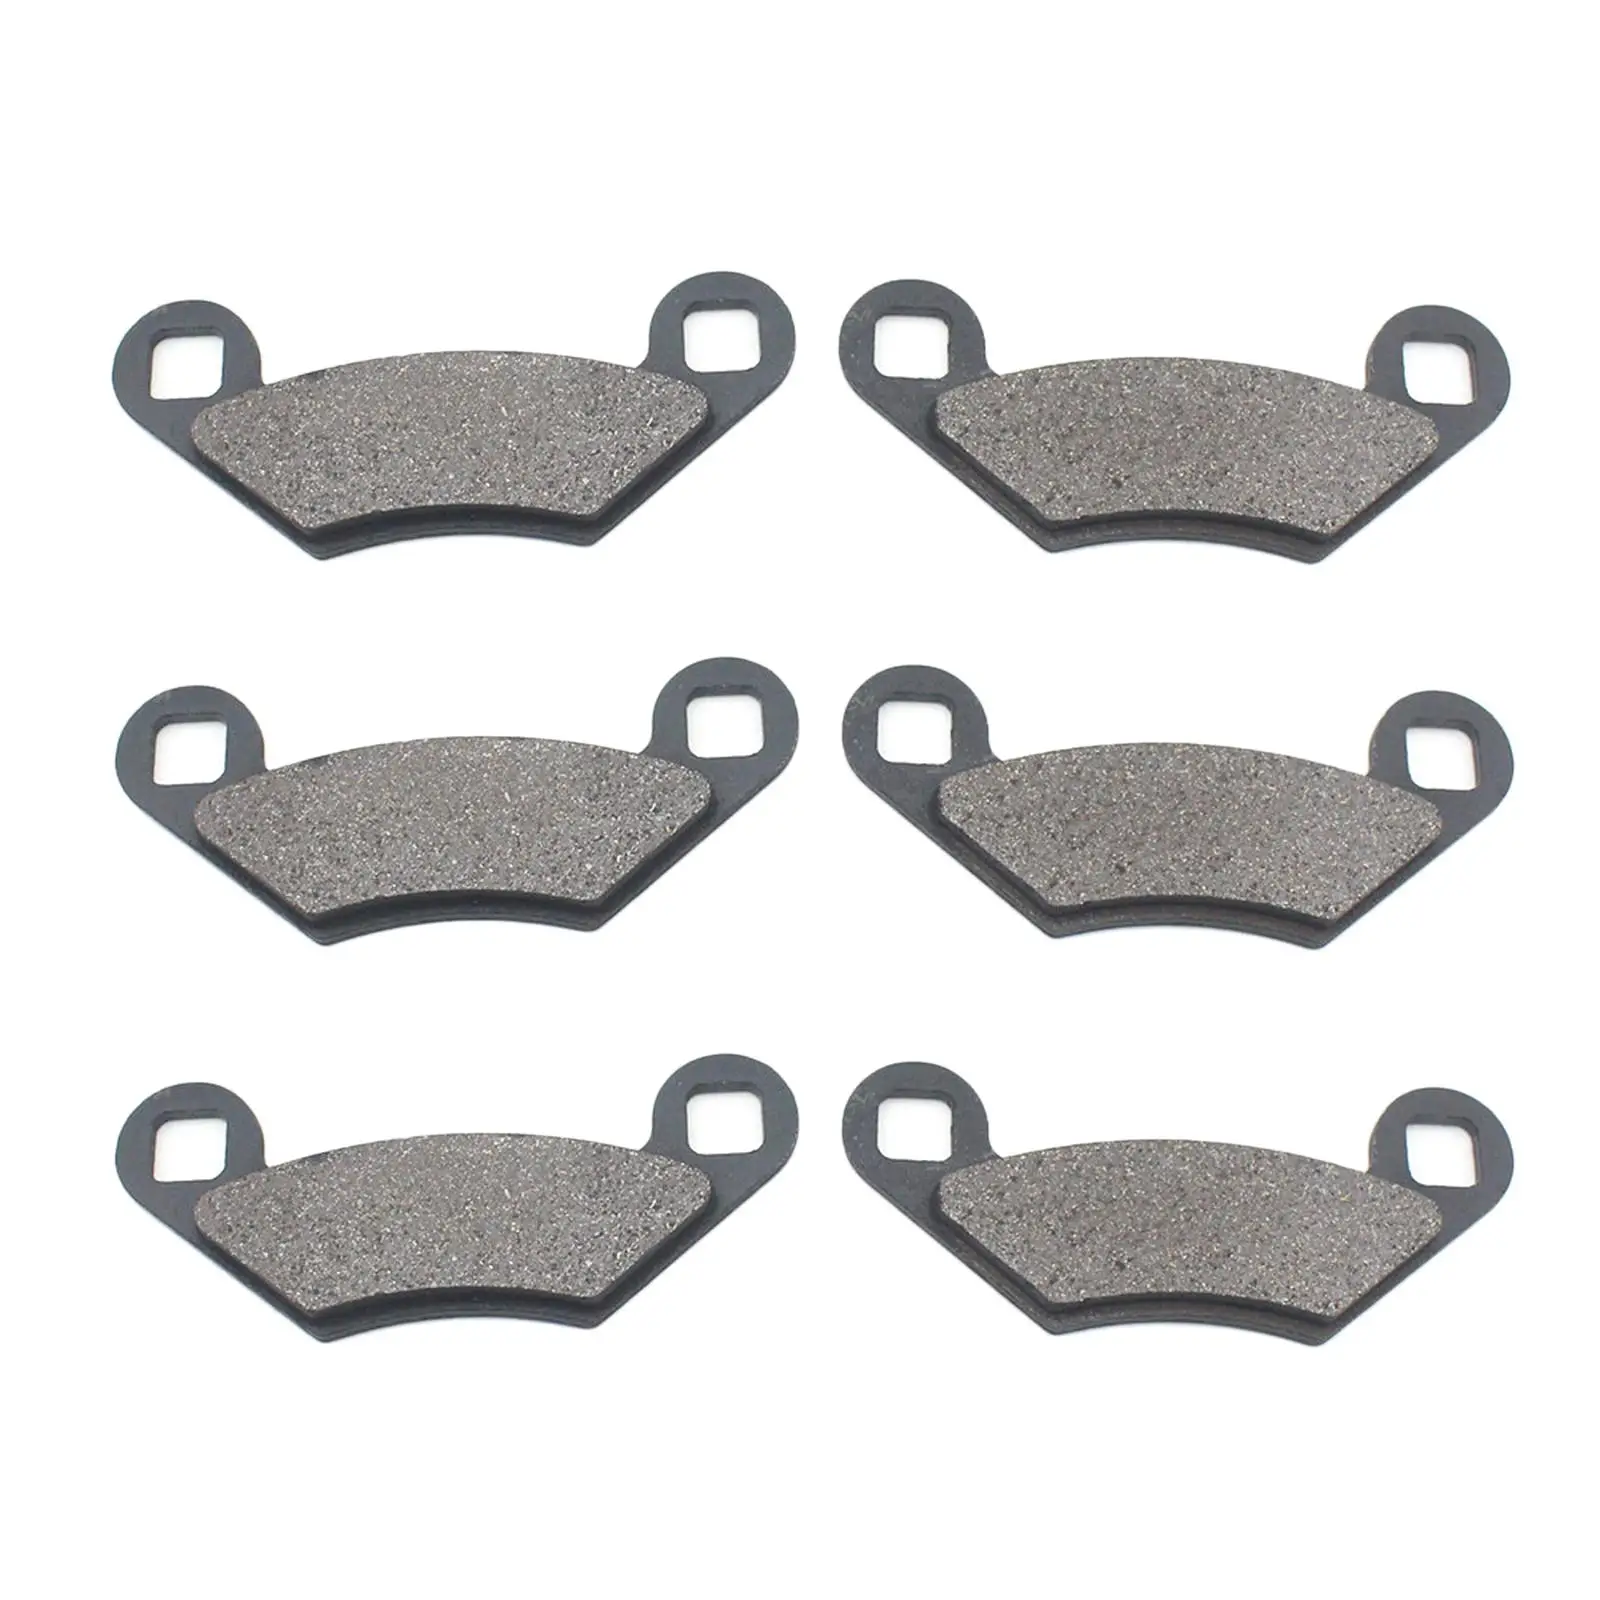 Motorcycle 6x Front Brake Pads for SPORTSMAN 570 EFI 2014-2017 Shoes